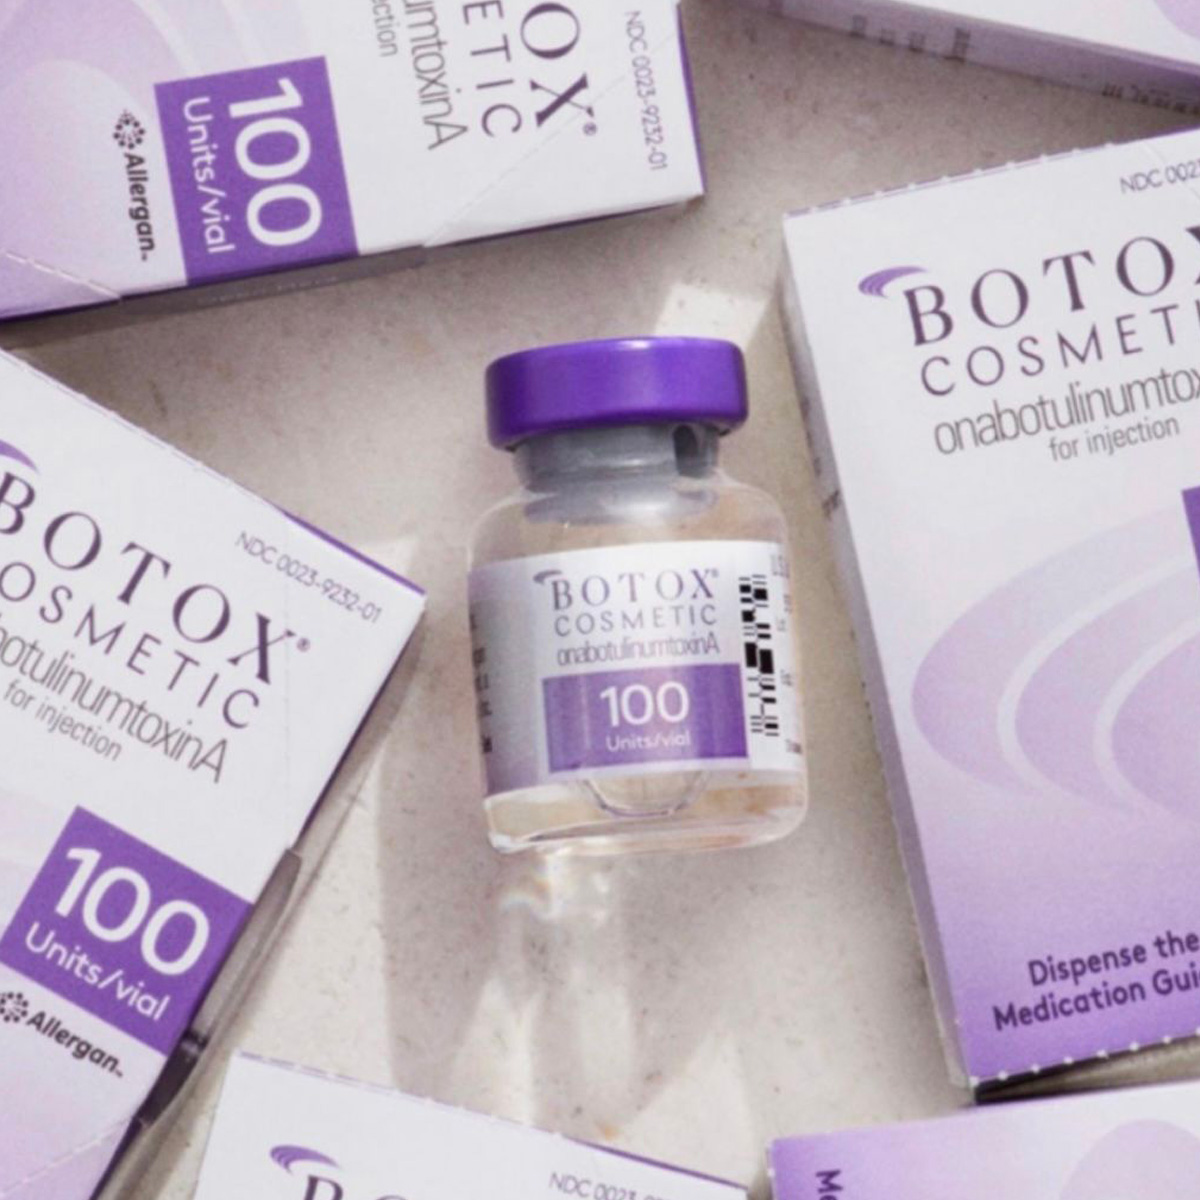 Botox bottle and boxes